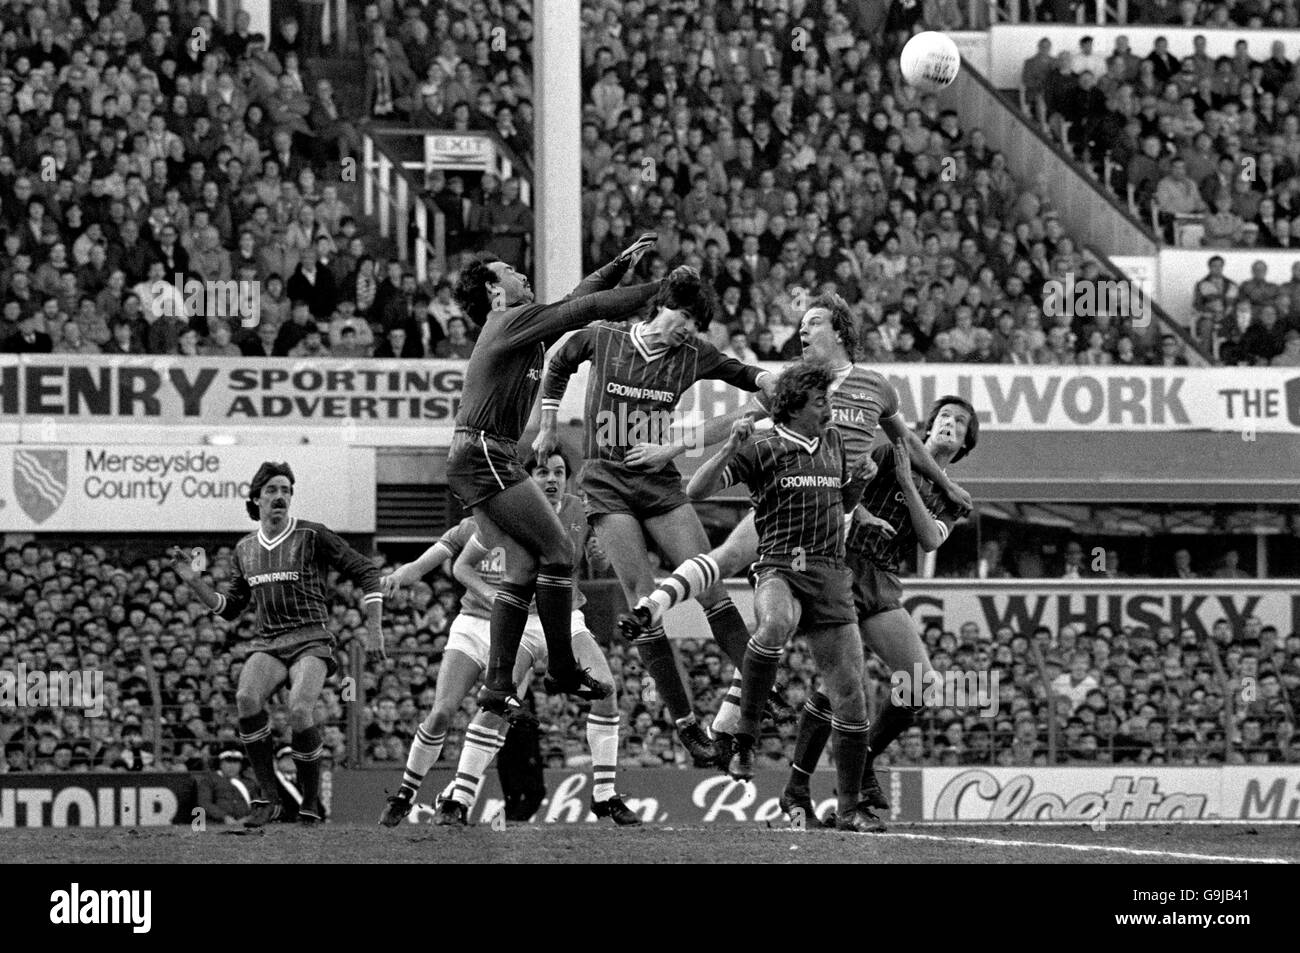 General action in the Liverpool goalmouth. (l-r) Liverpool's Mark Lawrenson, goalkeeper Bruce Grobbelaar, Everton's Graeme Sharp, Liverpool's Alan Hansen, Alan Kennedy, Everton's Andy Gray and Liverpool's Ronnie Whelan. Stock Photo